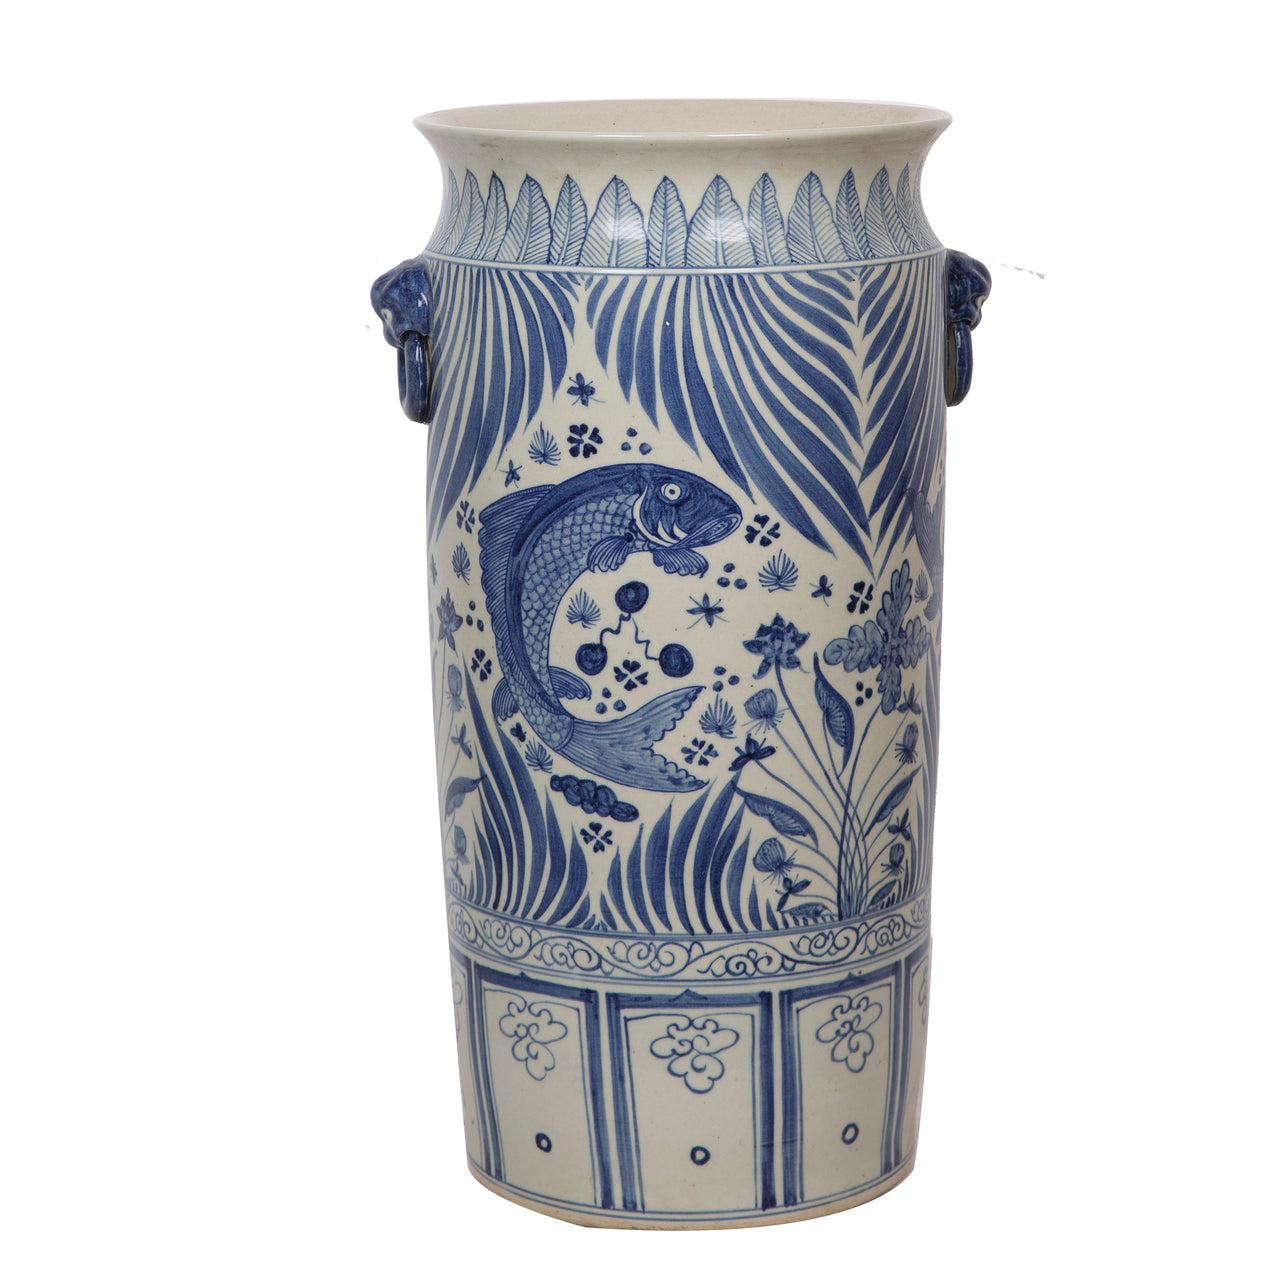 Blue and White Fish Motif Porcelain Umbrella Stand